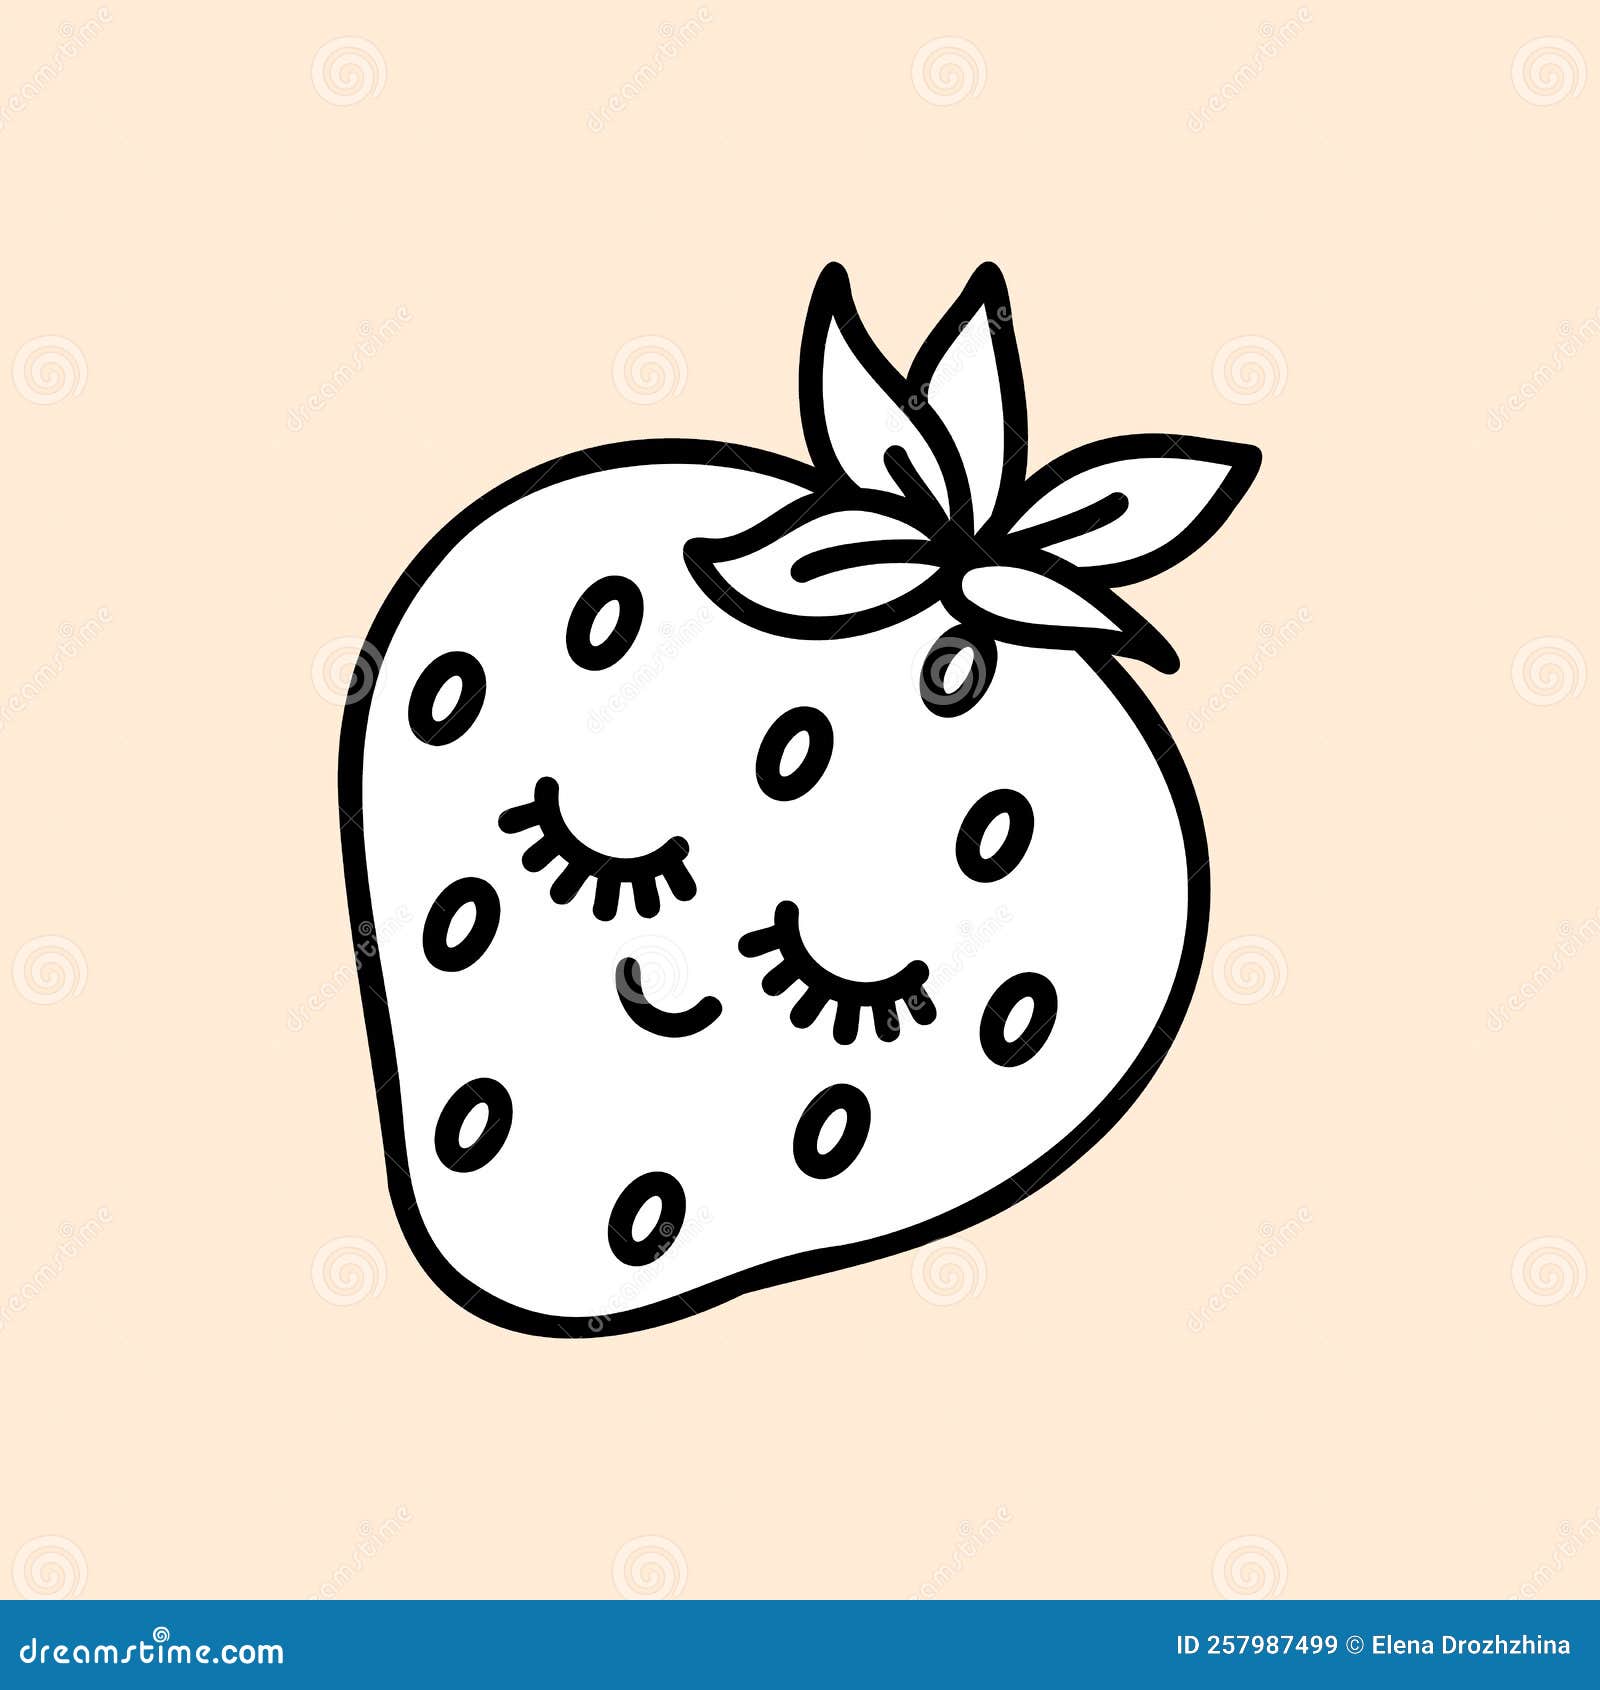 How to Draw a Strawberry - Really Easy Drawing Tutorial | Strawberry drawing,  Drawing tutorial easy, Easy drawings